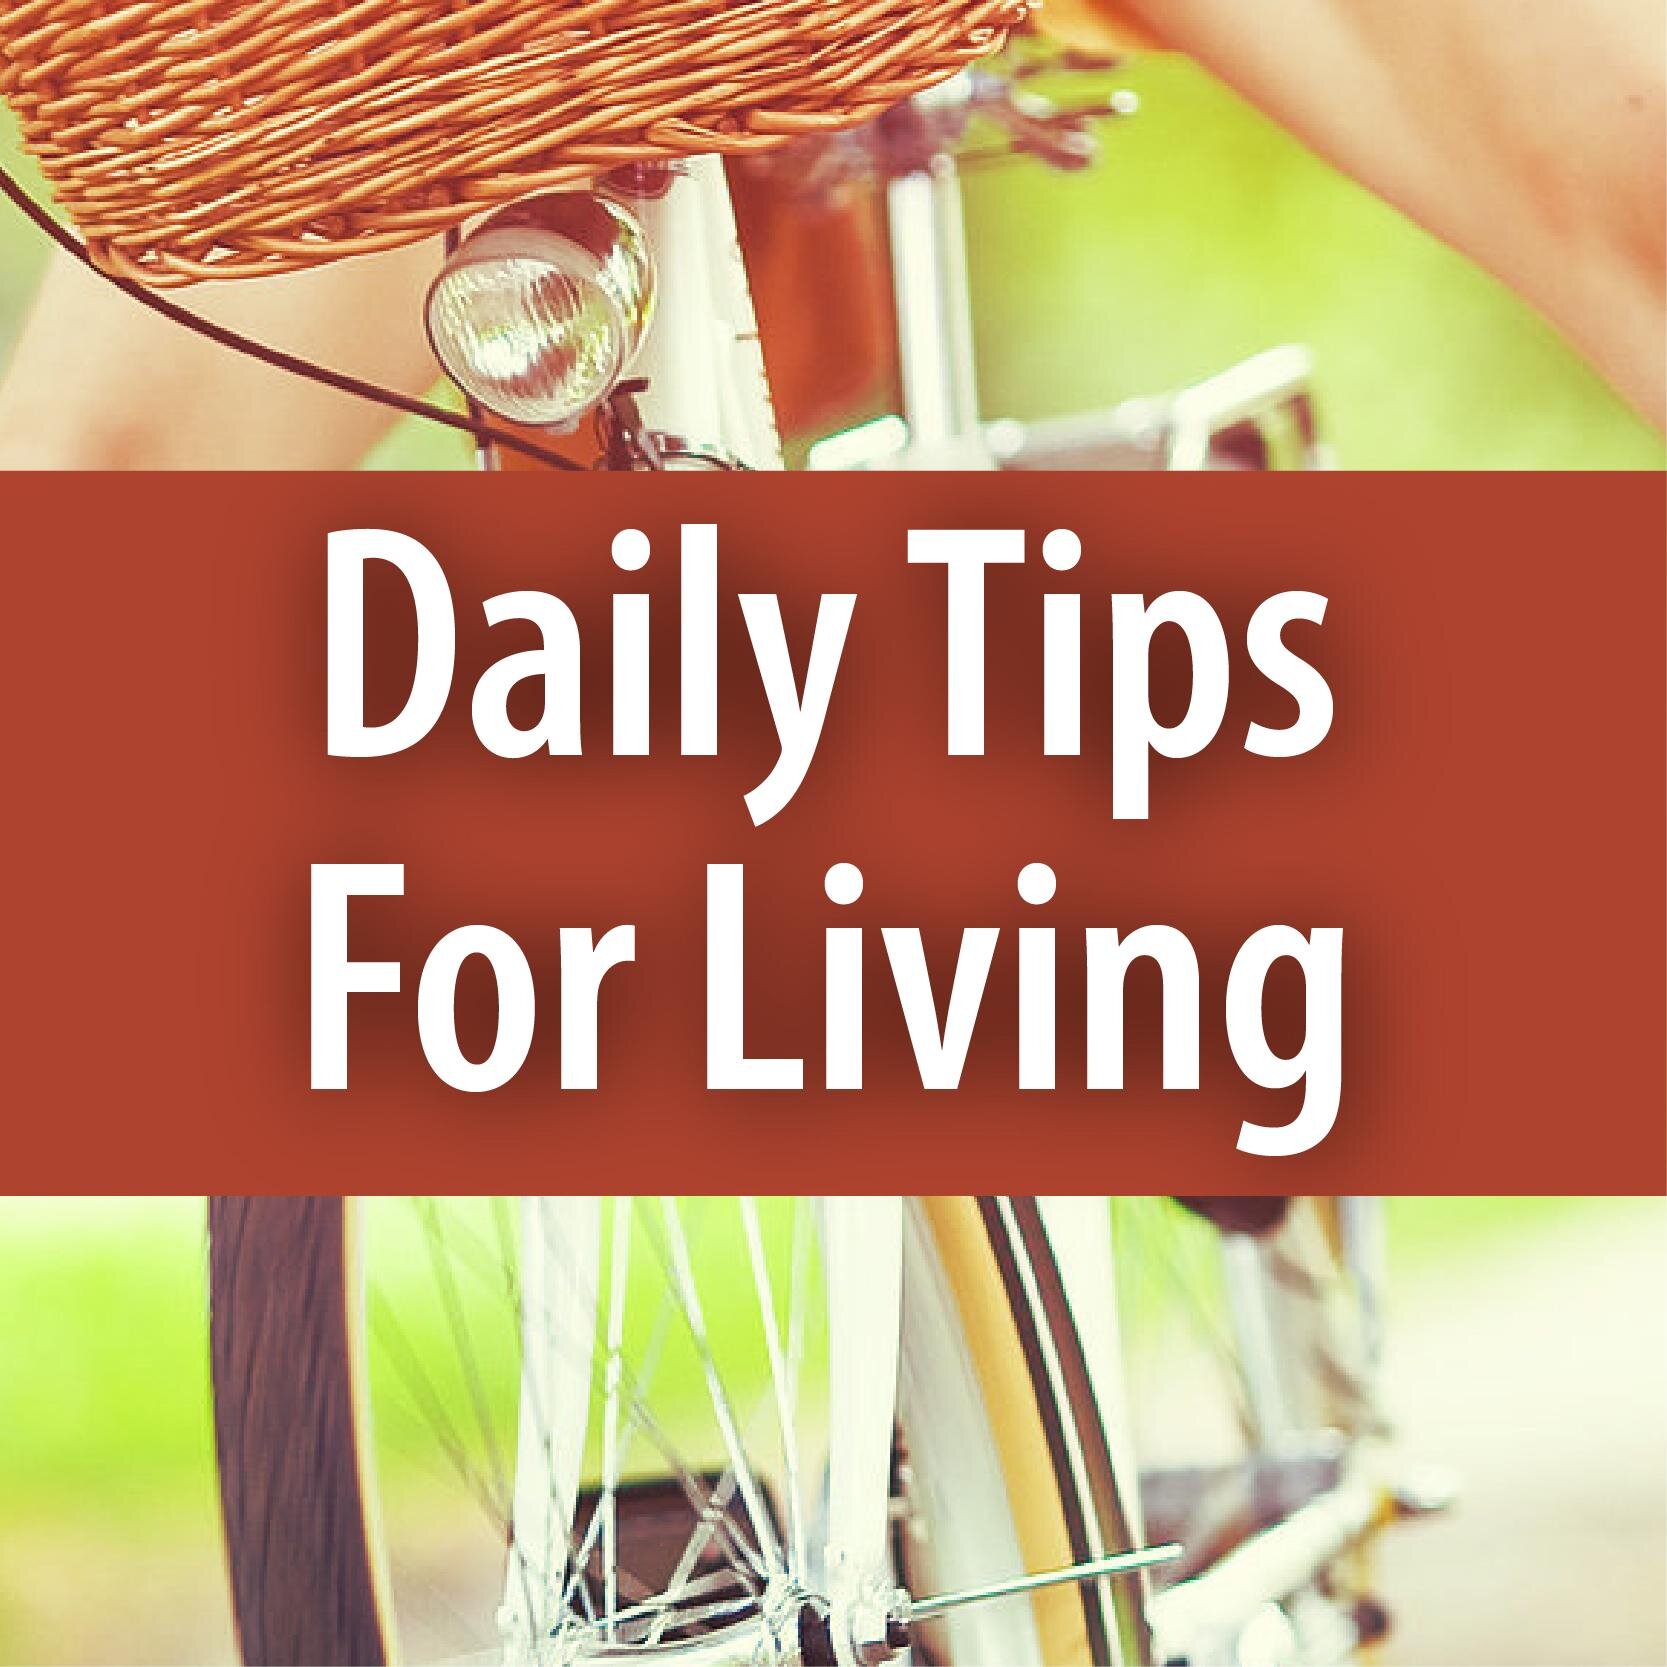 If you feel like you need a boost of confidence or just want to maximize your life you may want to check this page. We post nothing but tips for daily living.